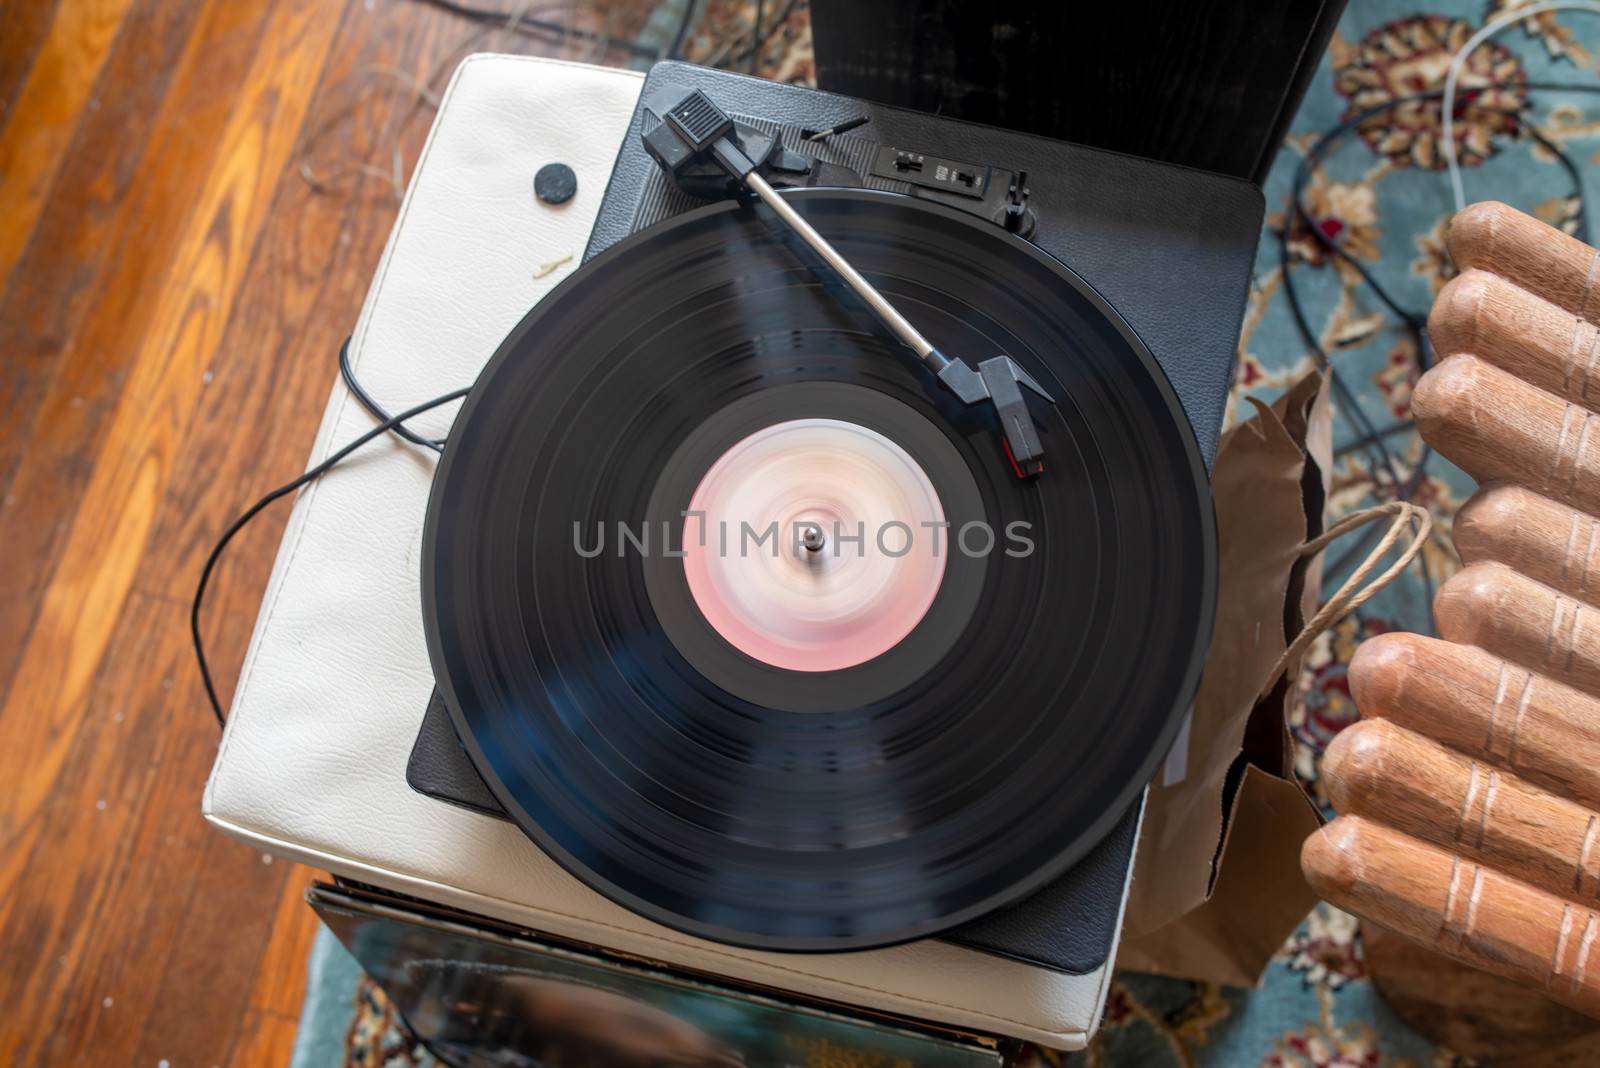 Seventies vinyl record spins on turntable by marysalen